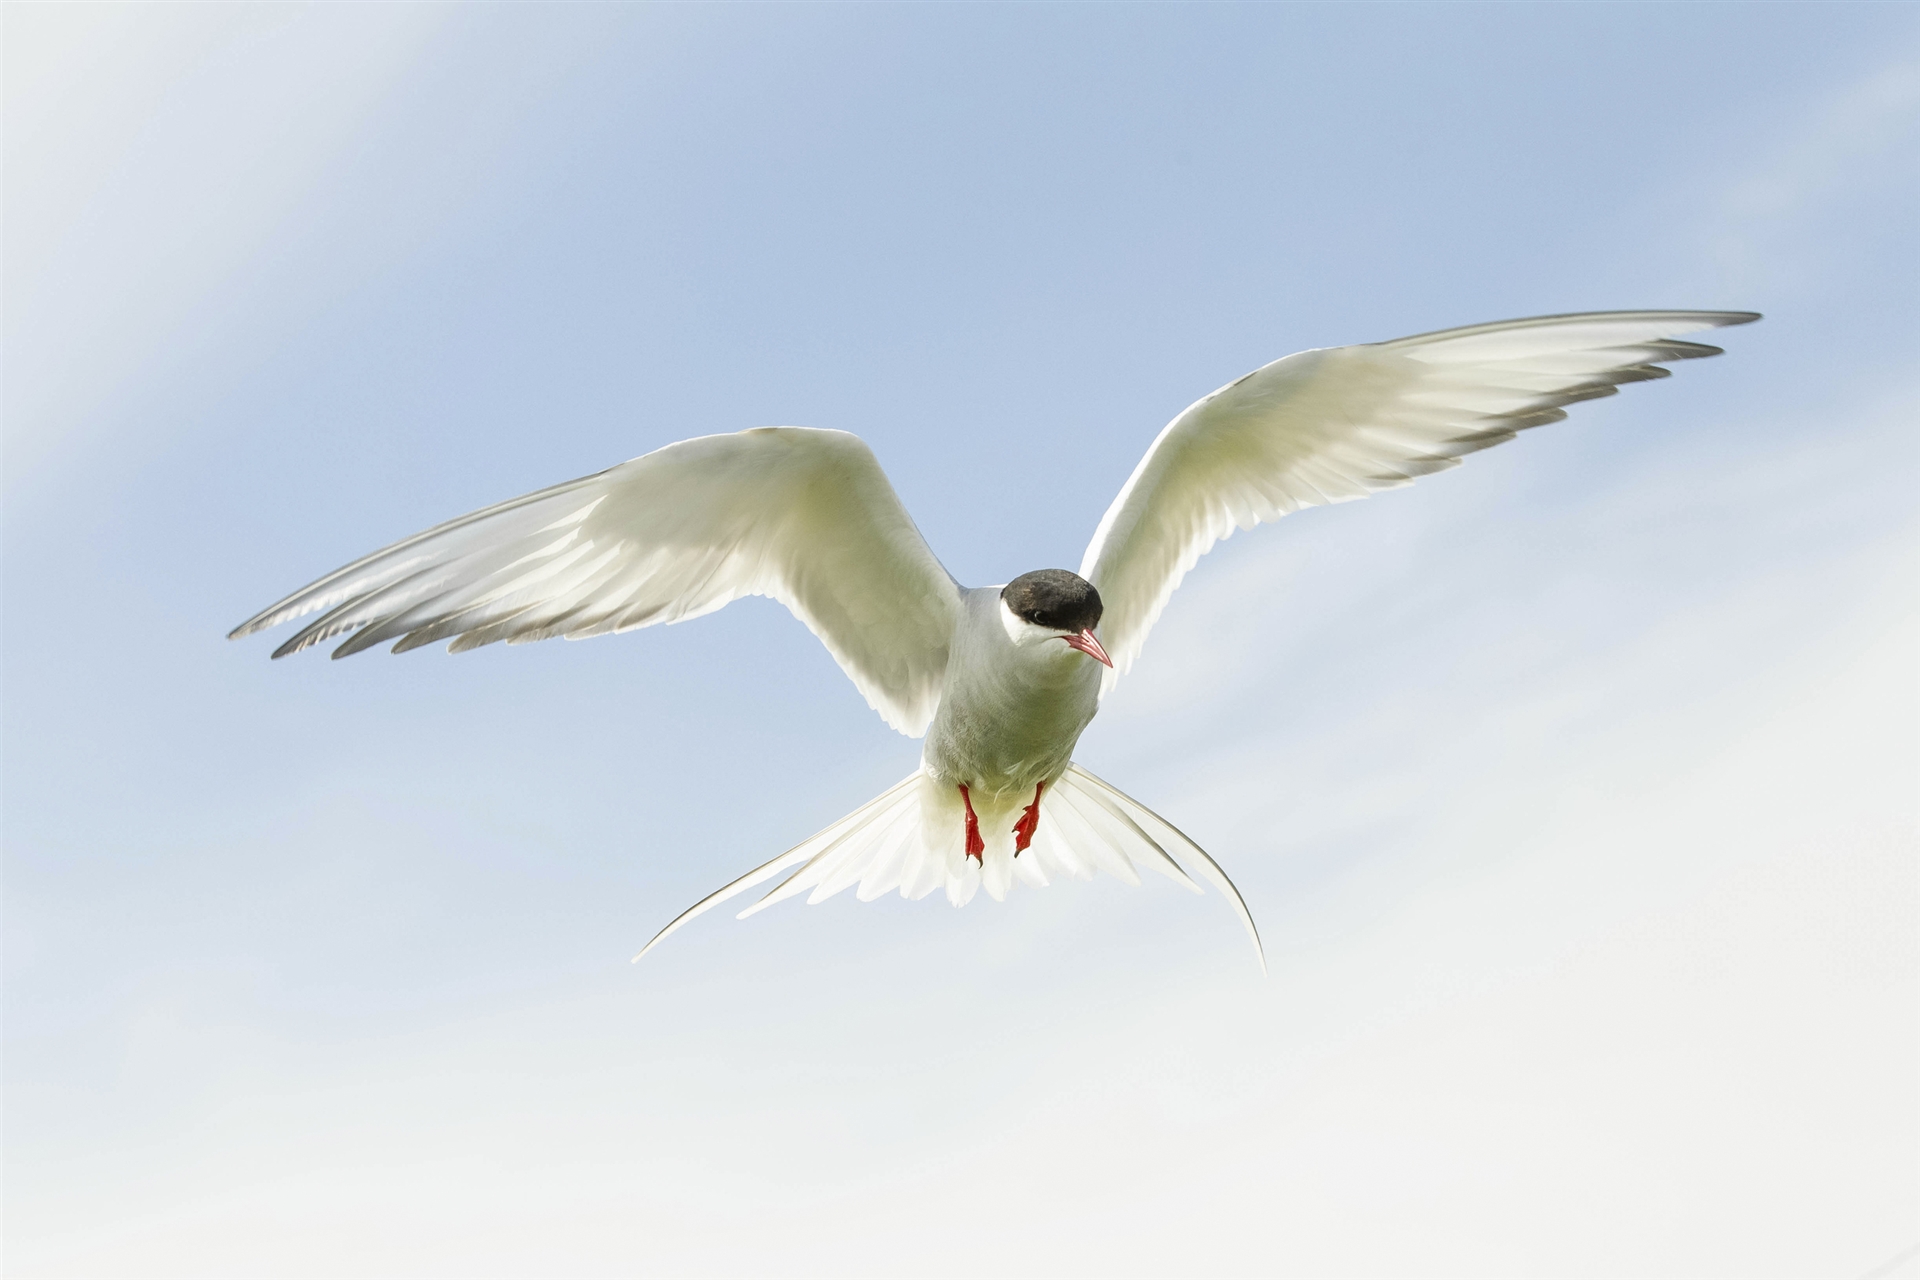 An Arctic Tern with its wings spread wide in flight. It is a white, gull-like bird with a black head and red, pointed beak.